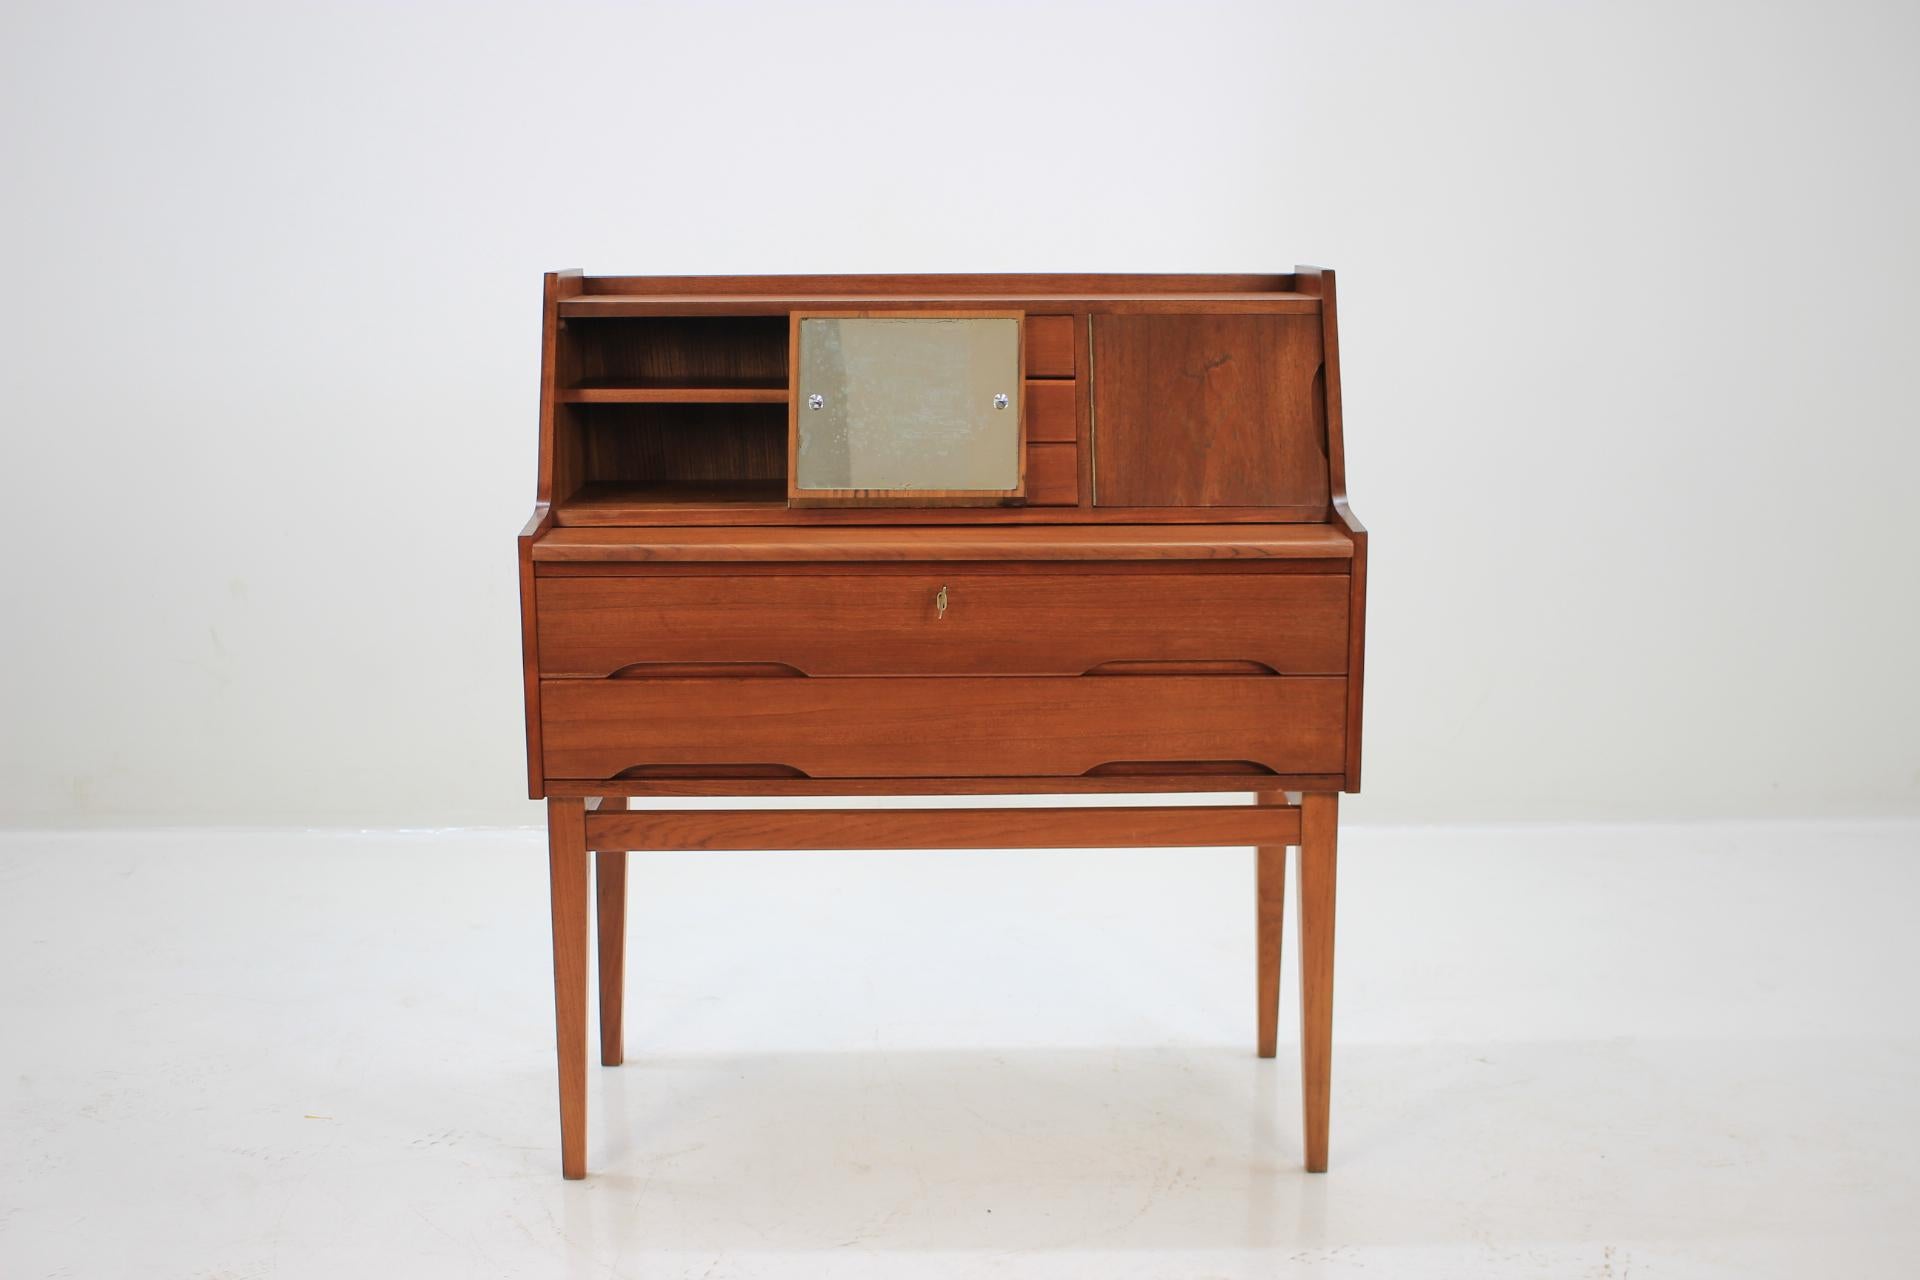 This Danish teak writing cabinet features mirror, two large drawers and three small one. The extendable writing area desk can be extended up to 71 cm. This item was carefully refurbished.